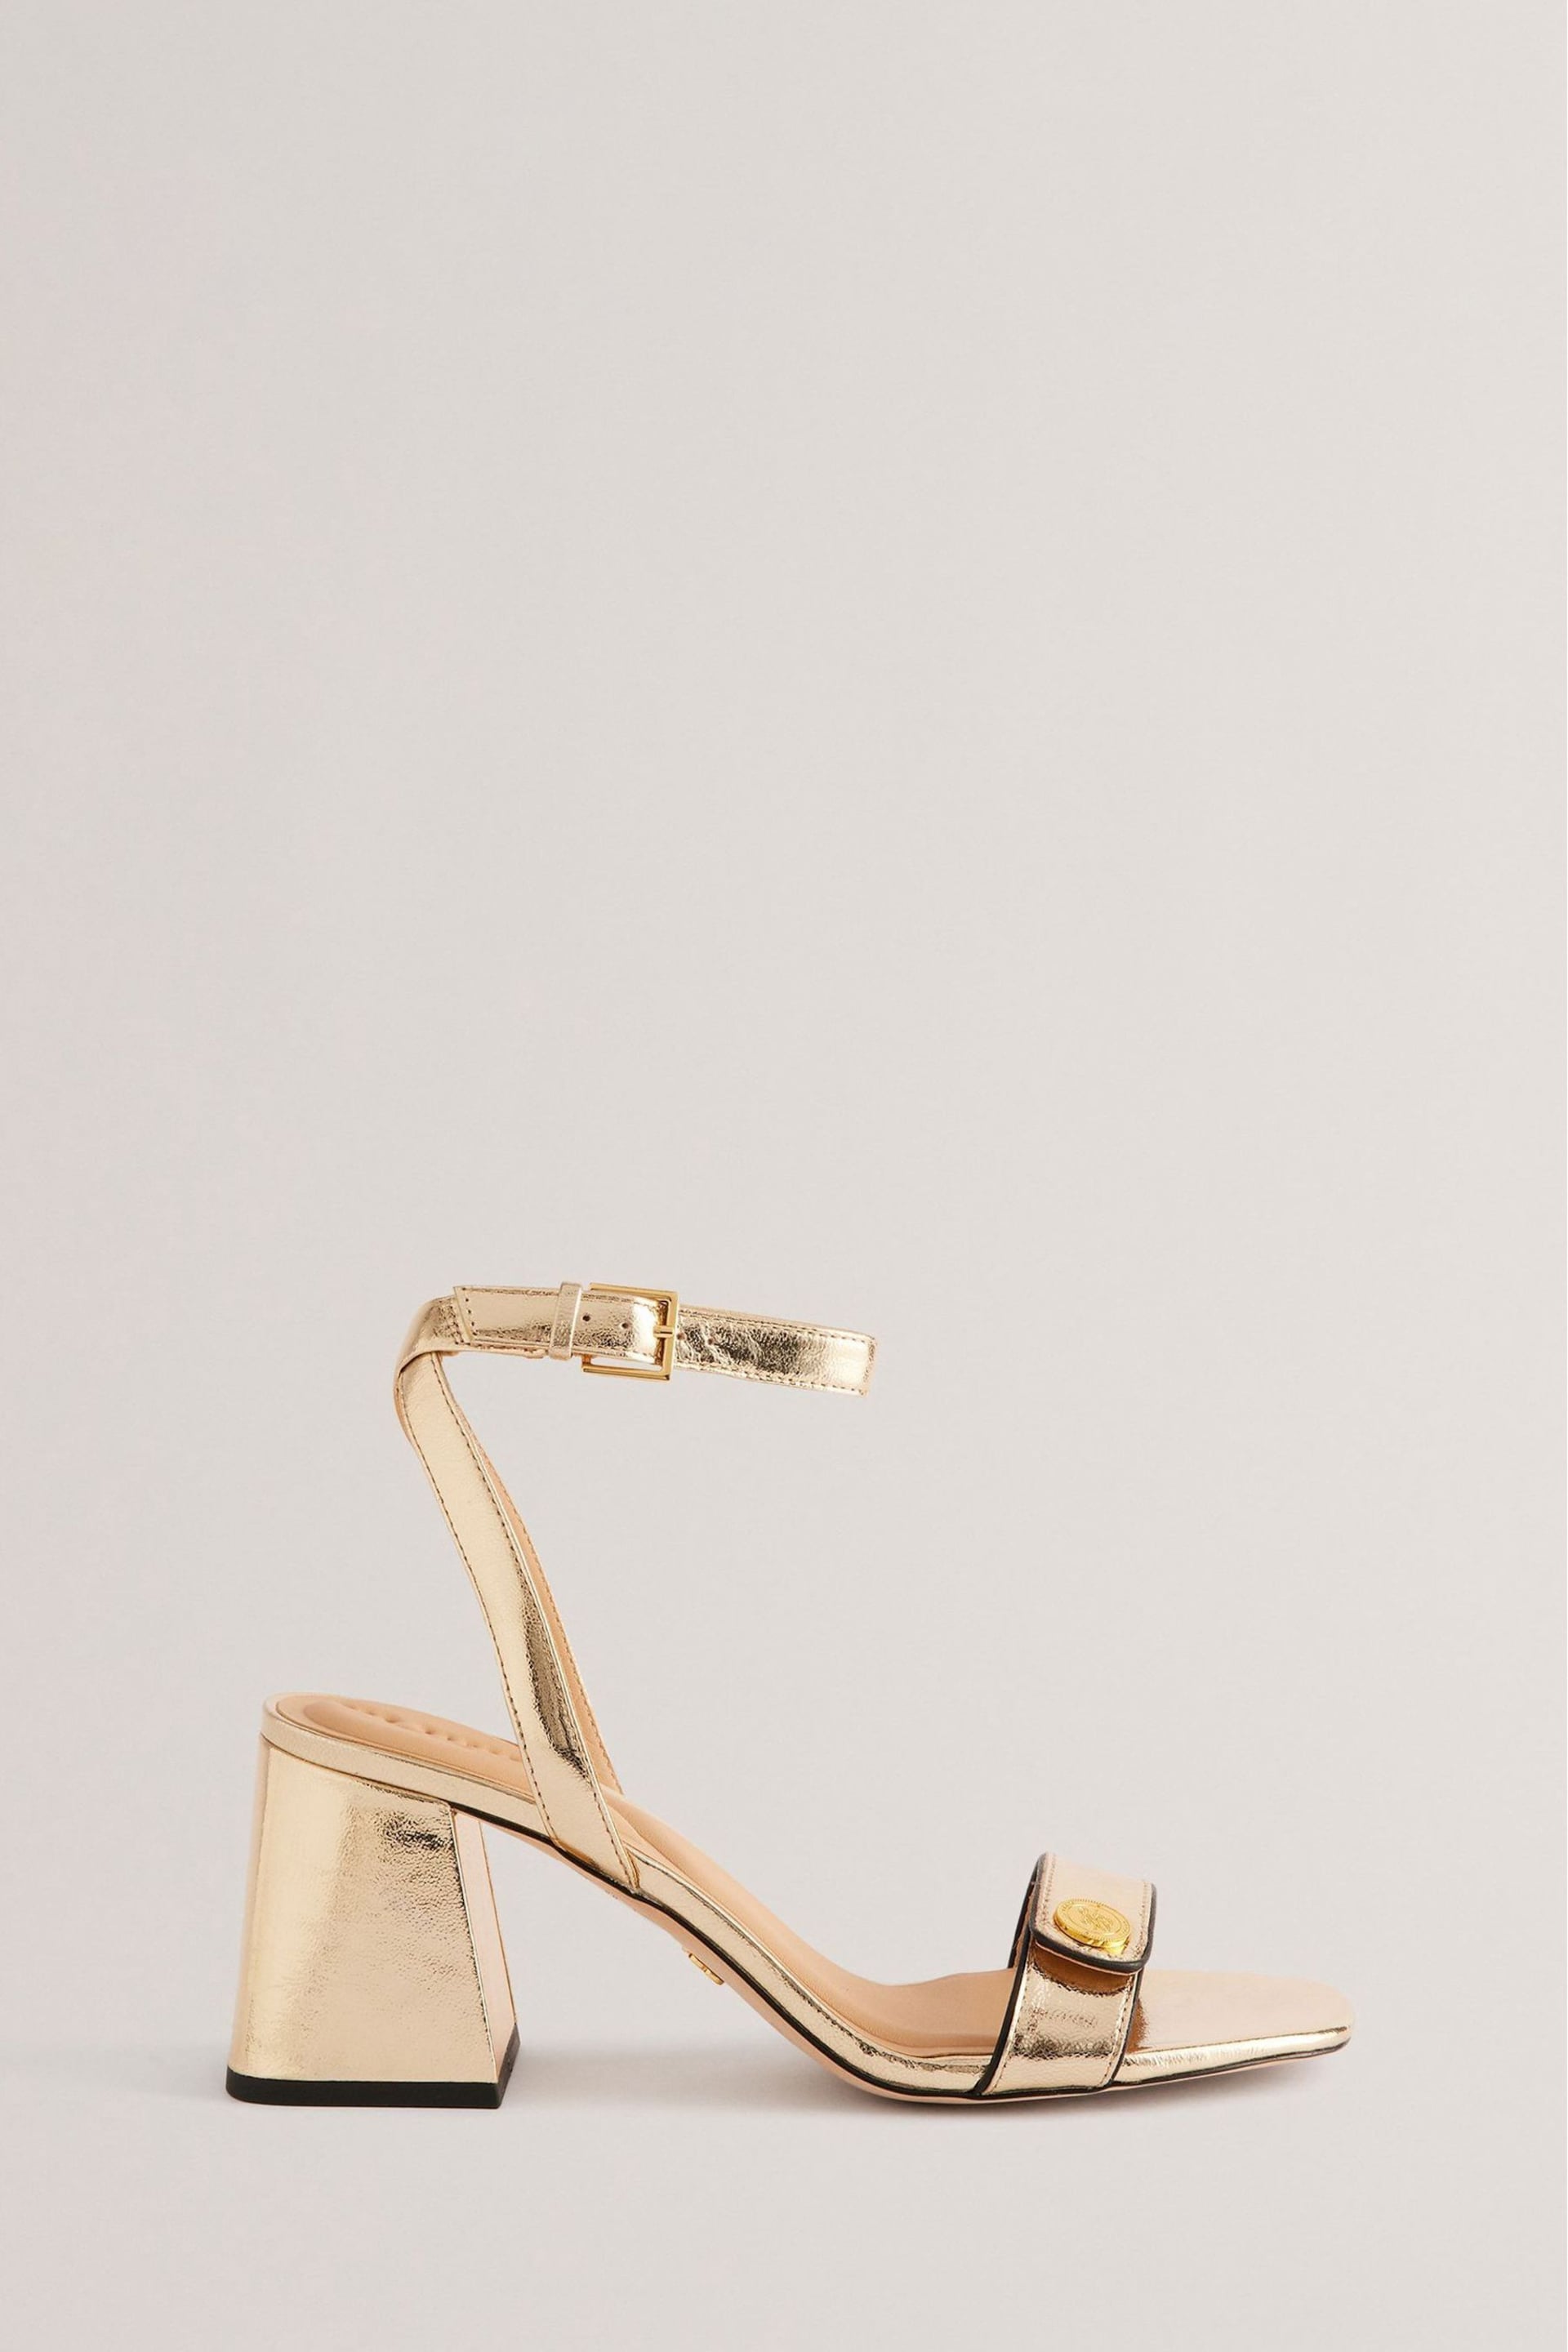 Ted Baker Gold Milliiy Mid Block Heel Sandals With Signature Coin - Image 1 of 5